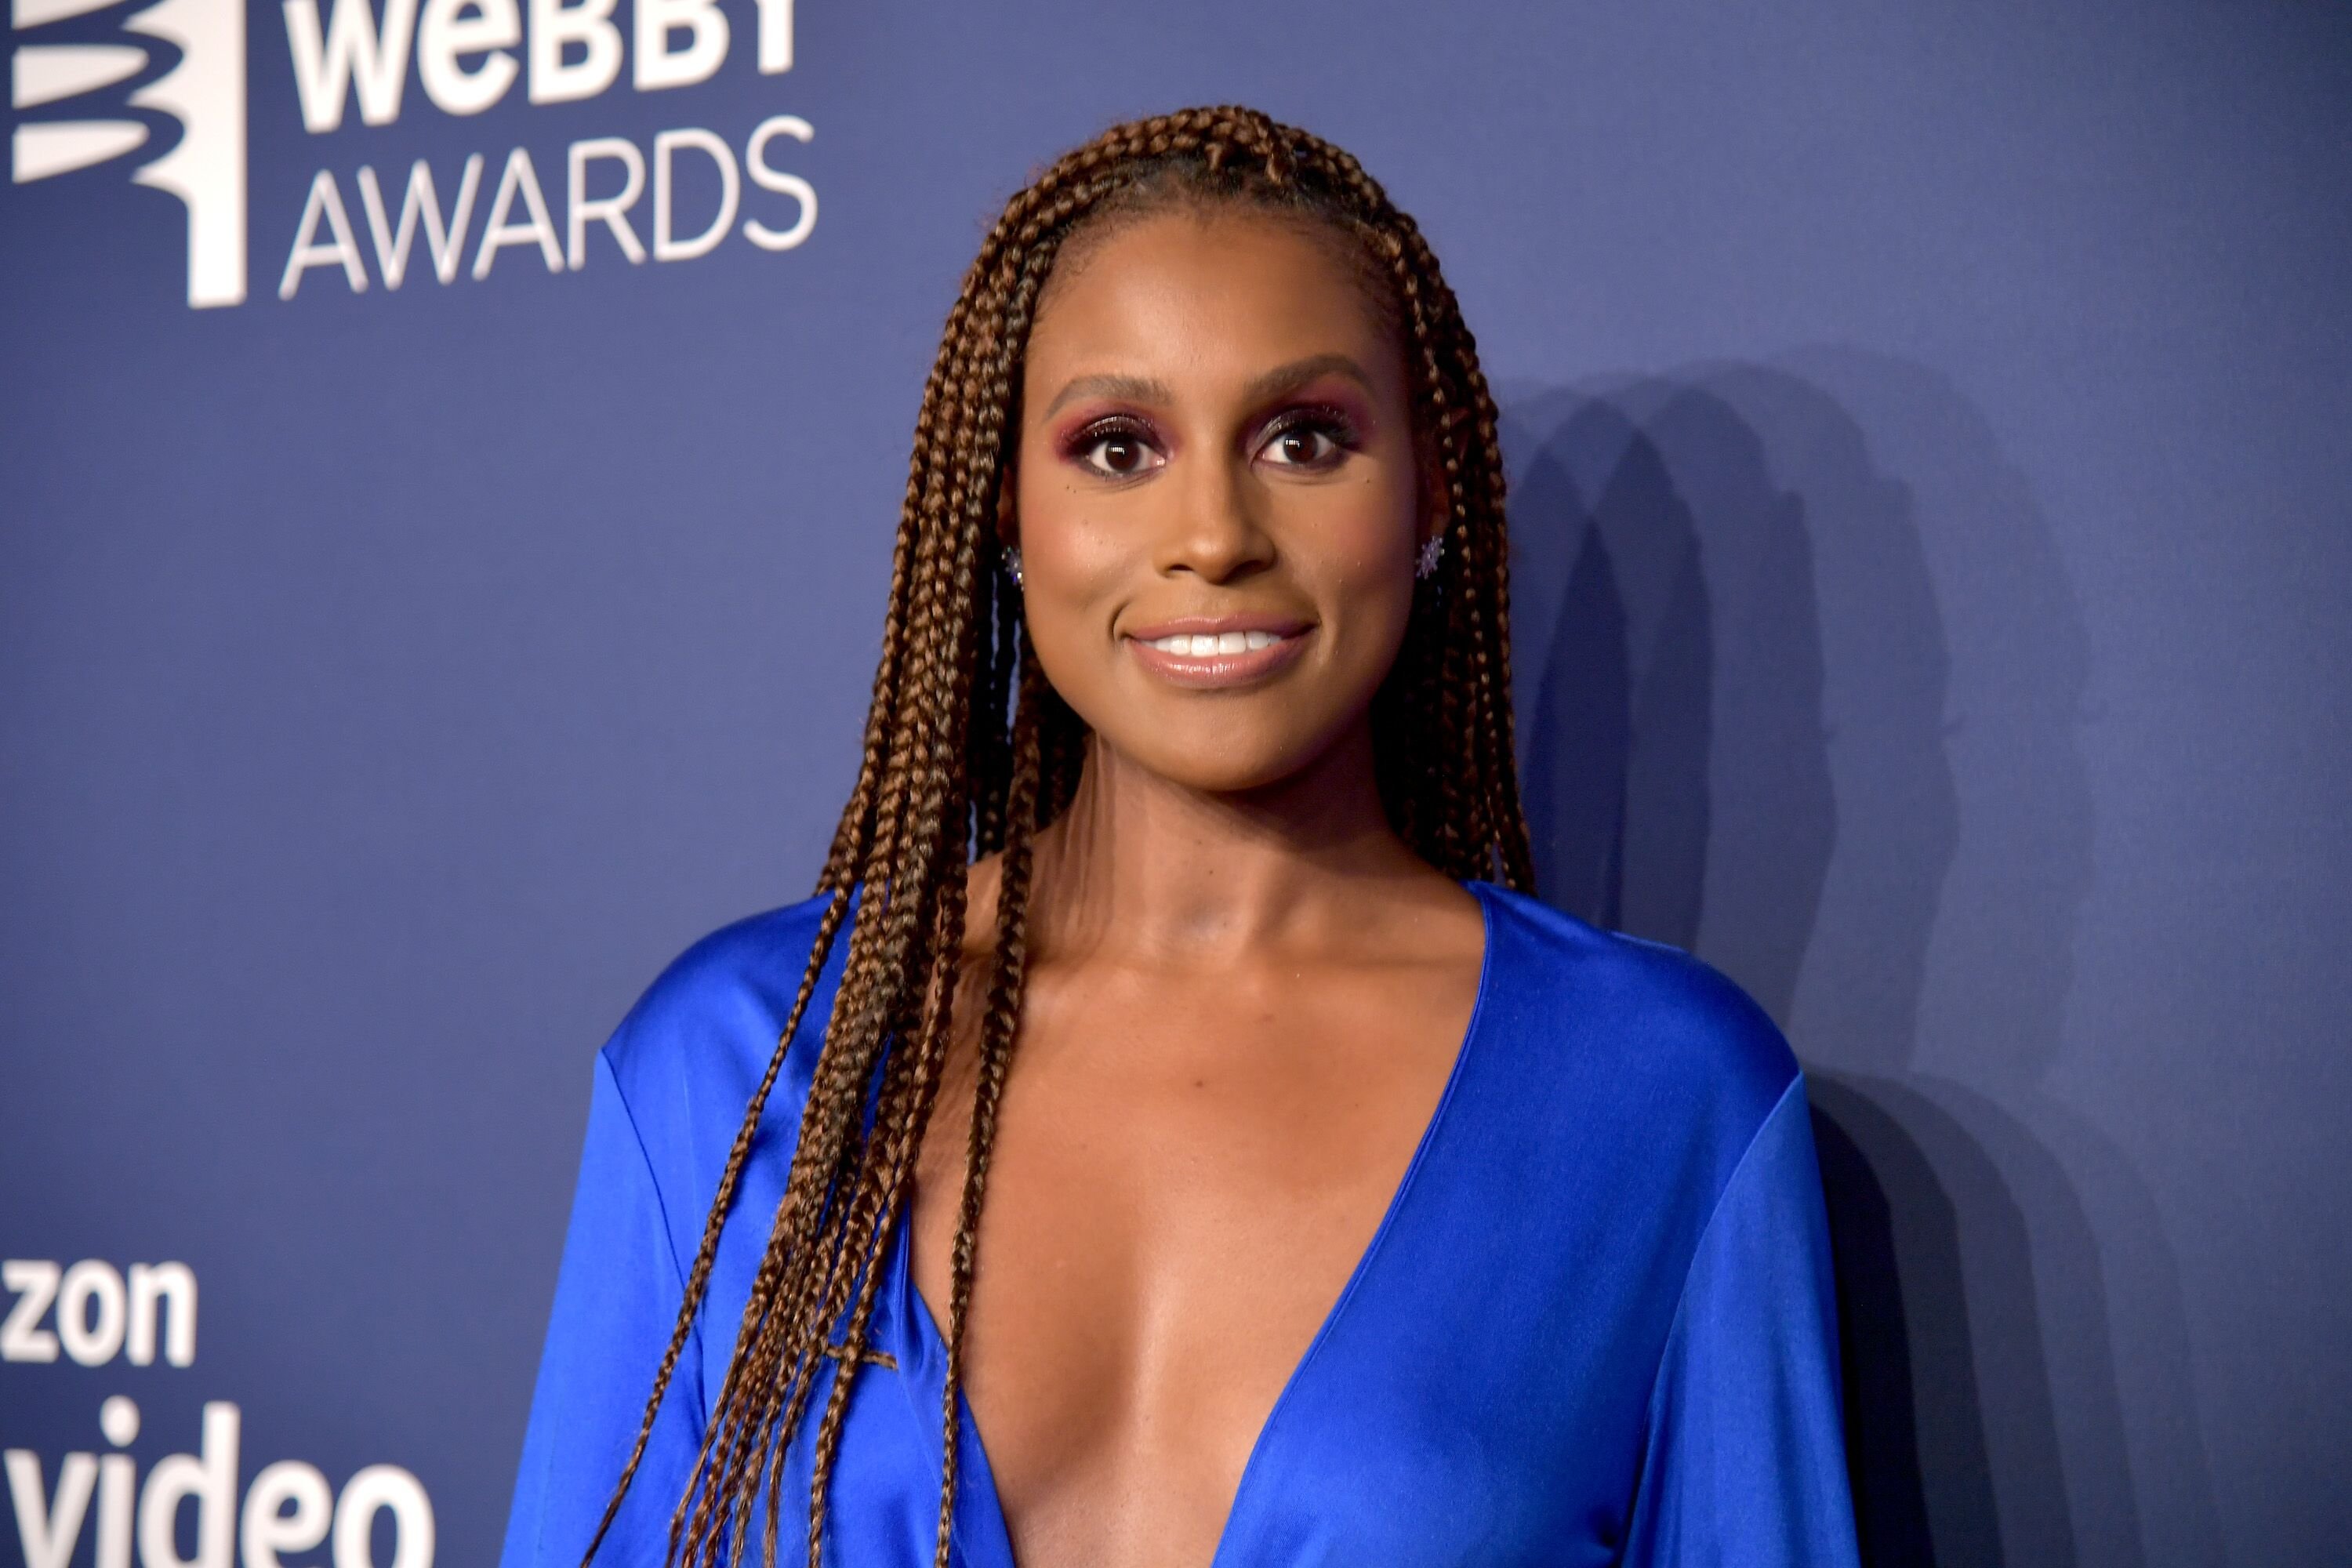 Issa Rae at the WebBT Awards | Source: Getty Images/GlobalImagesUkraine